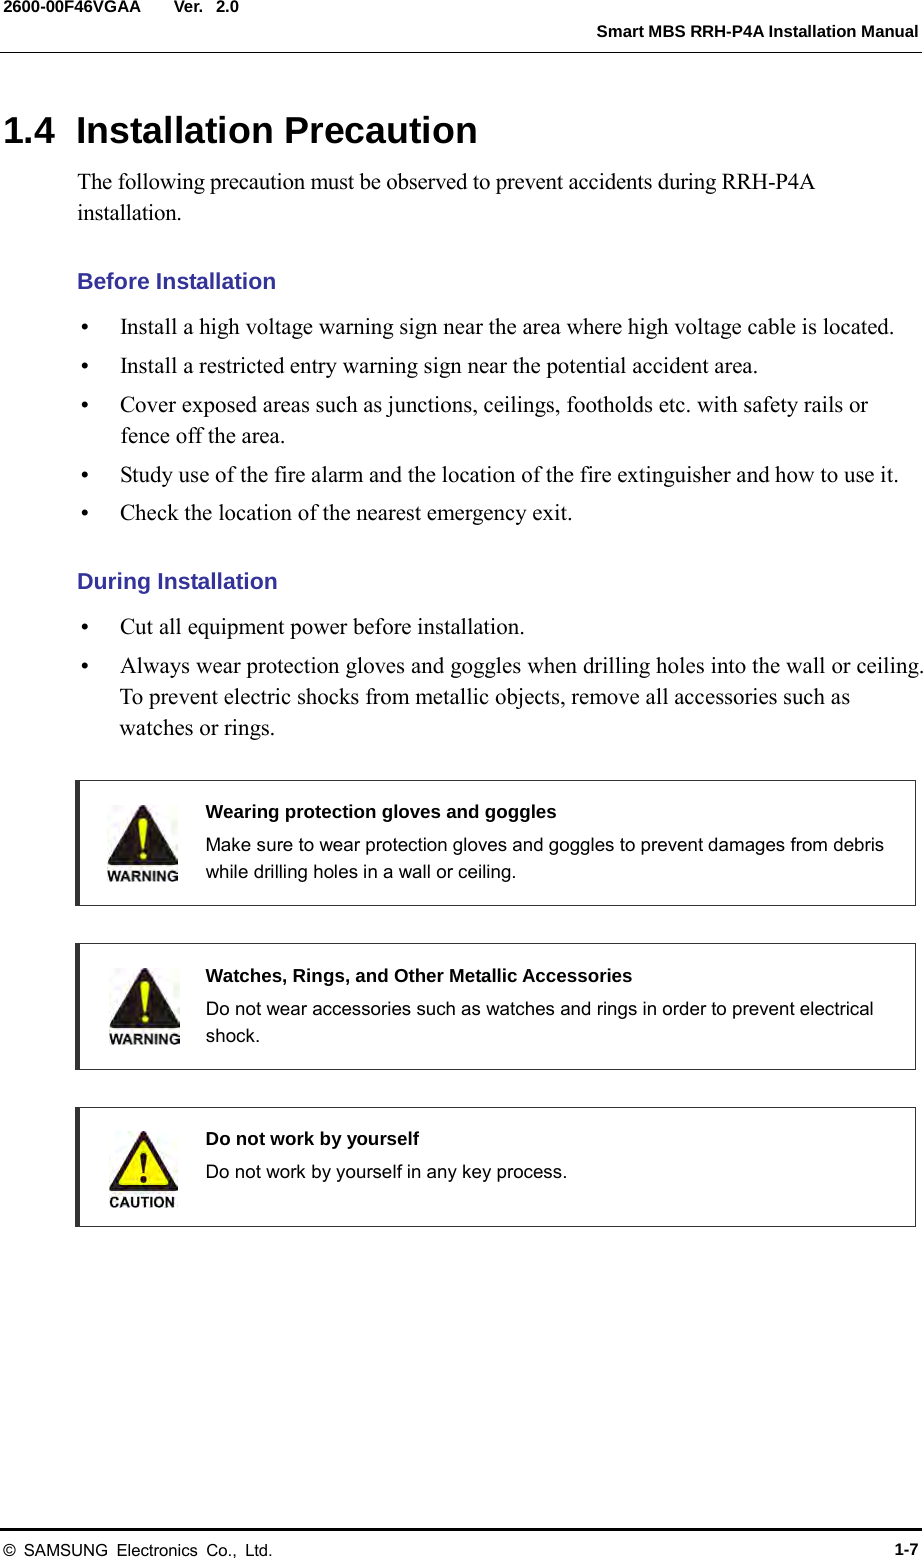  Ver.   Smart MBS RRH-P4A Installation Manual 2600-00F46VGAA 2.0 1.4 Installation Precaution The following precaution must be observed to prevent accidents during RRH-P4A installation.  Before Installation  Install a high voltage warning sign near the area where high voltage cable is located.  Install a restricted entry warning sign near the potential accident area.  Cover exposed areas such as junctions, ceilings, footholds etc. with safety rails or fence off the area.  Study use of the fire alarm and the location of the fire extinguisher and how to use it.  Check the location of the nearest emergency exit.  During Installation  Cut all equipment power before installation.  Always wear protection gloves and goggles when drilling holes into the wall or ceiling. To prevent electric shocks from metallic objects, remove all accessories such as watches or rings.   Wearing protection gloves and goggles  Make sure to wear protection gloves and goggles to prevent damages from debris while drilling holes in a wall or ceiling.     Watches, Rings, and Other Metallic Accessories   Do not wear accessories such as watches and rings in order to prevent electrical shock.   Do not work by yourself  Do not work by yourself in any key process.     © SAMSUNG Electronics Co., Ltd. 1-7 